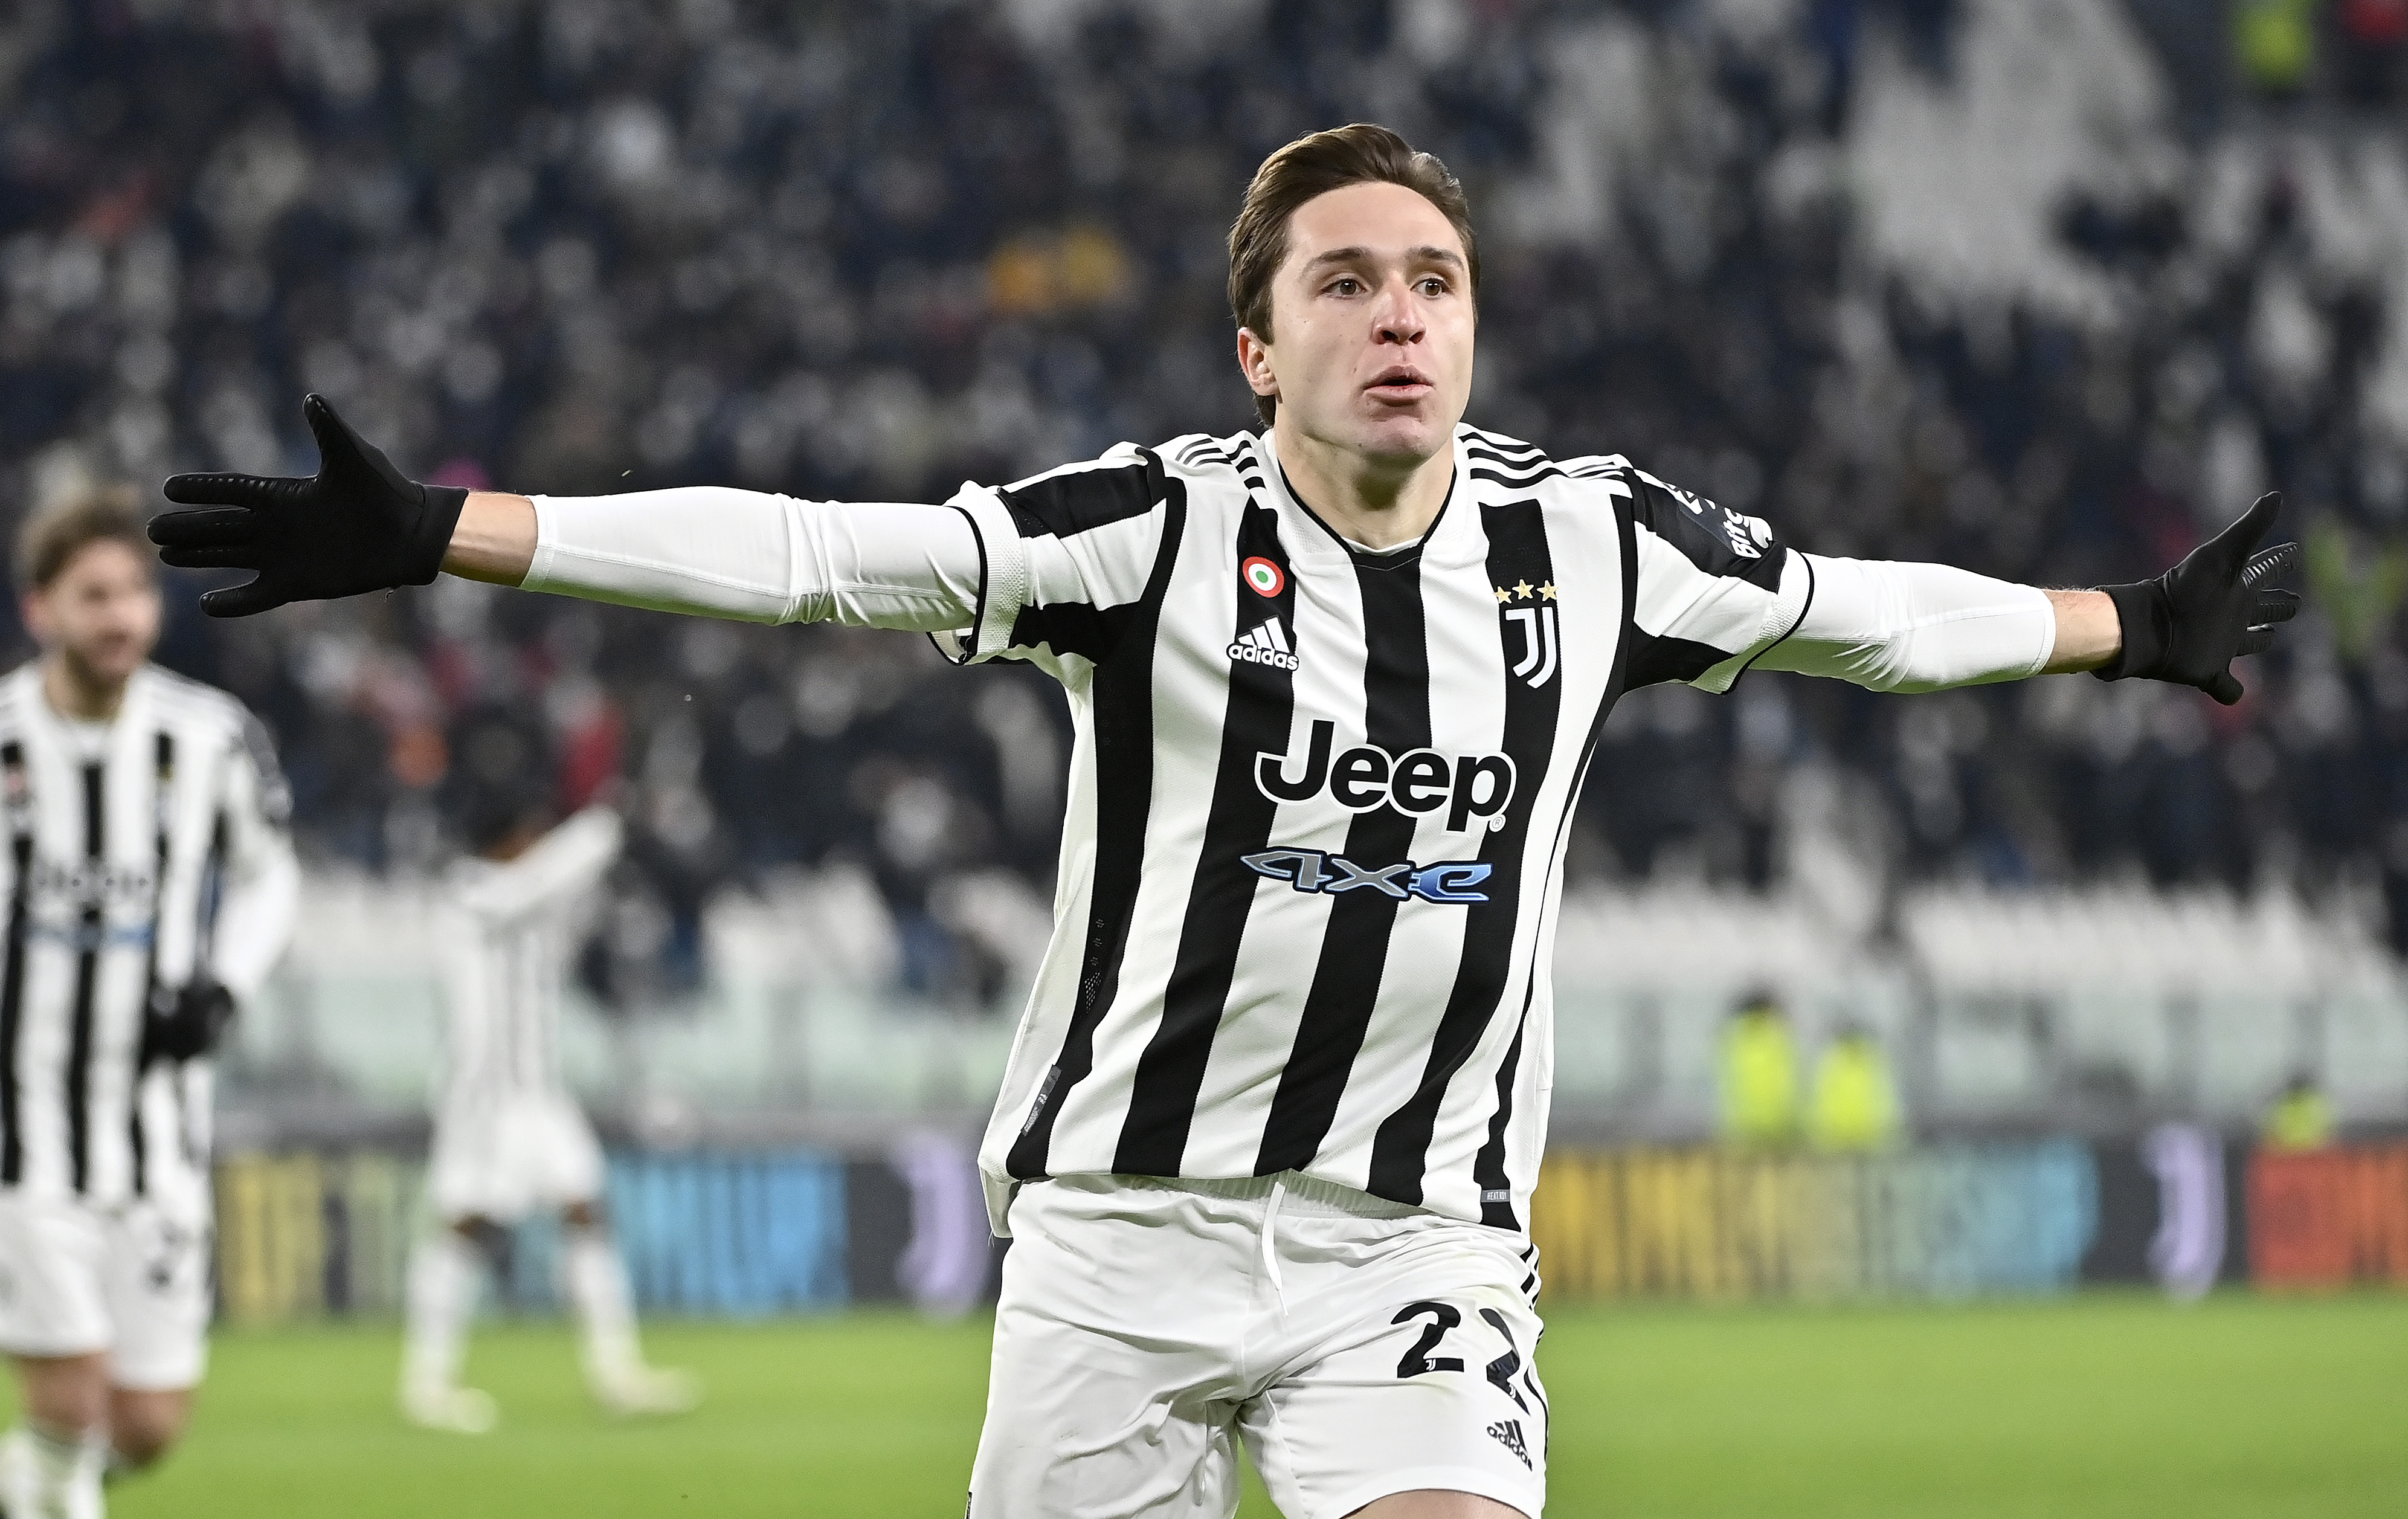 Juventus winger and Liverpool target Federico Chiesa.